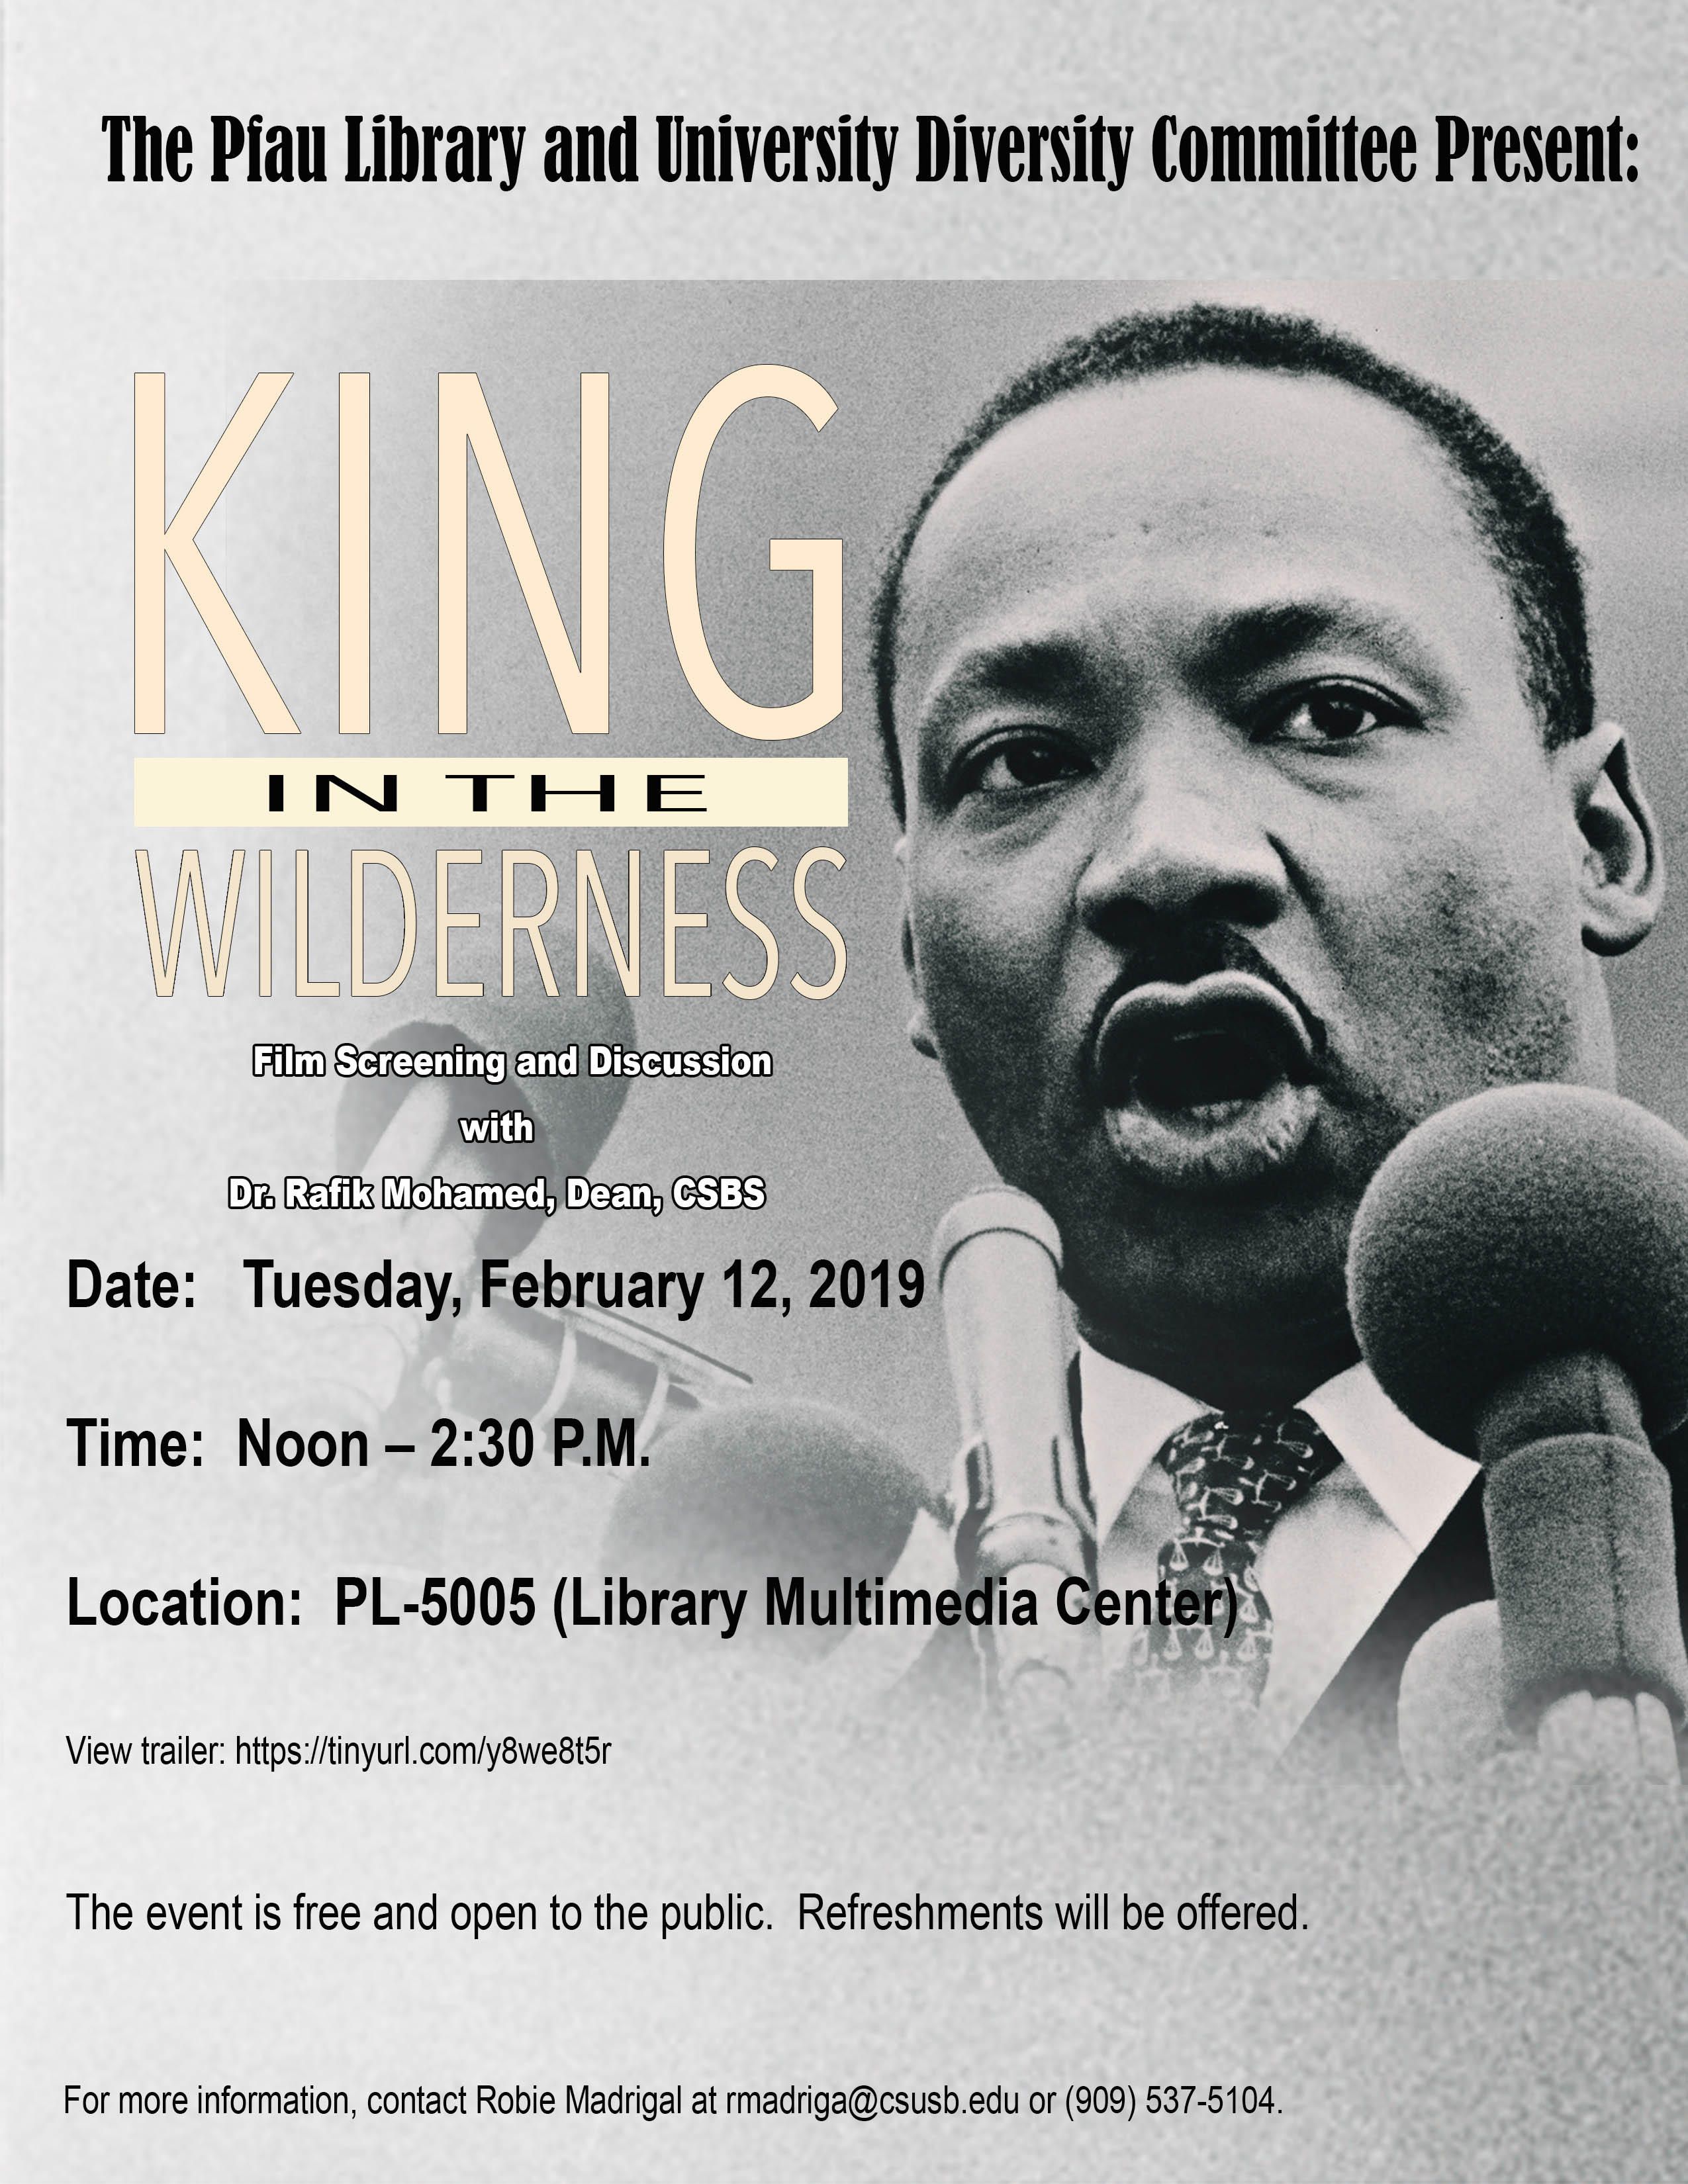 Documentary about Dr. Martin Luther King Jr. to be shown and discussed at Cal State San Bernardino